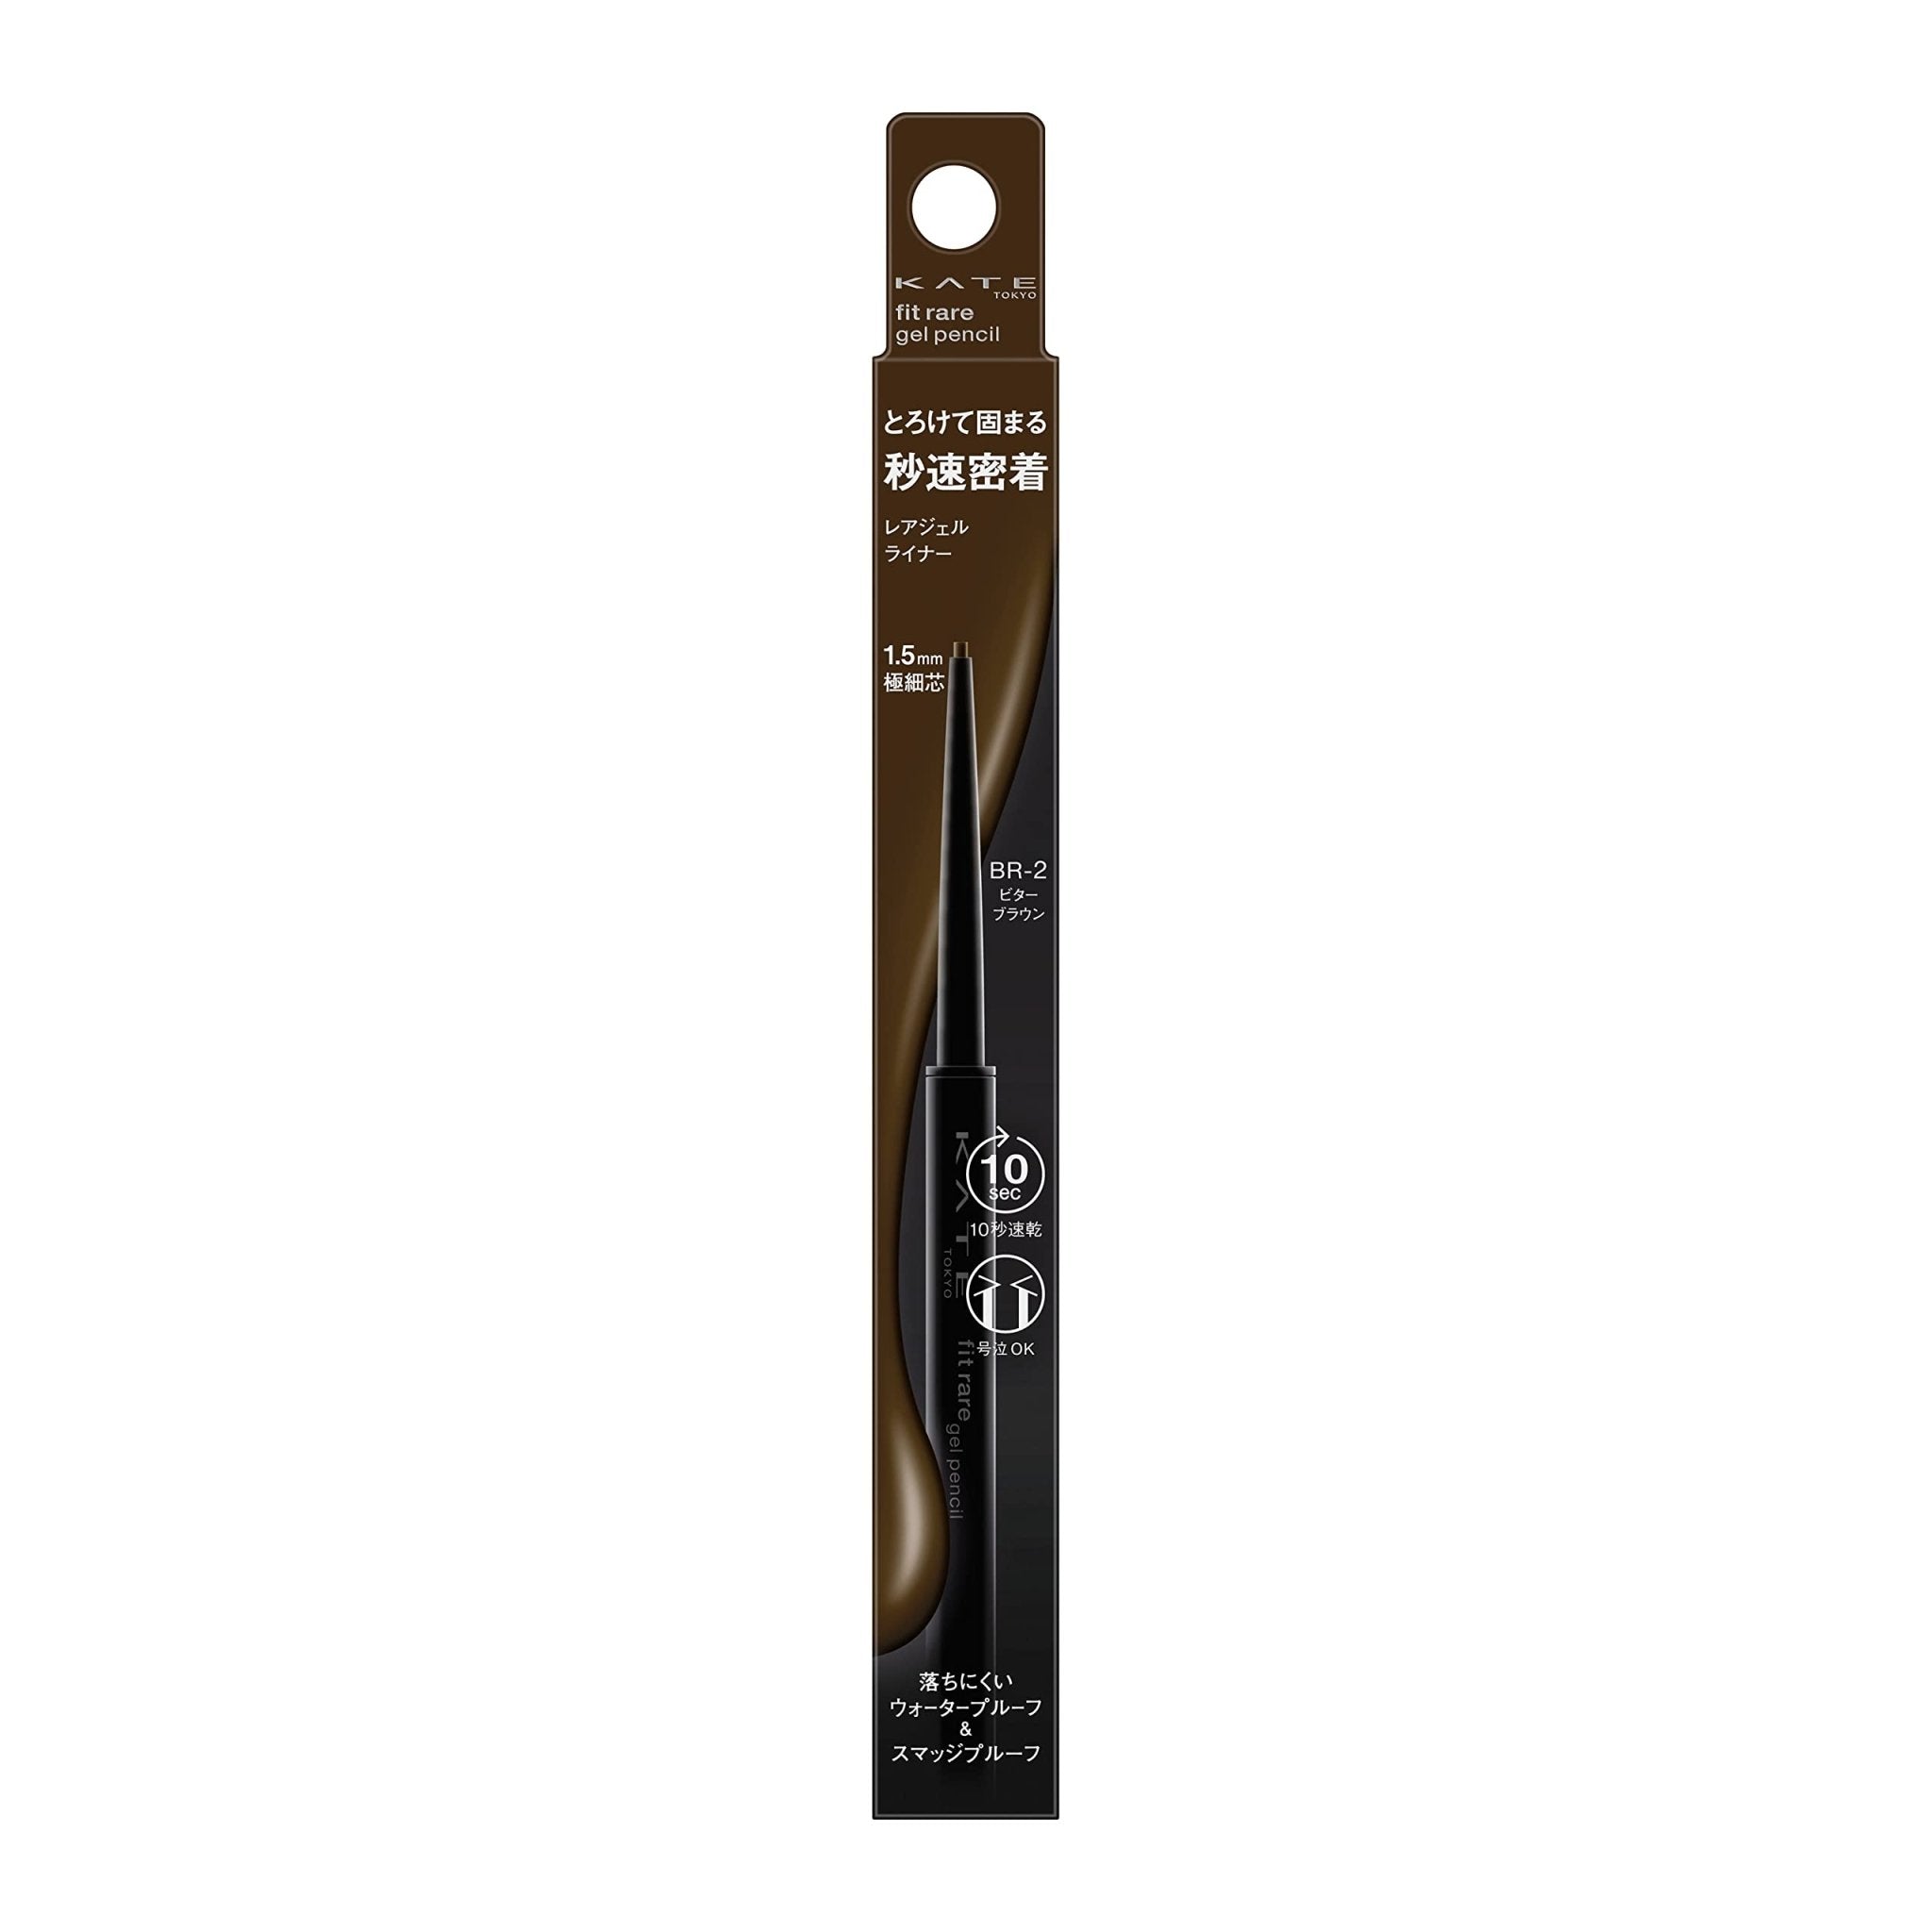 Kate Rare Fit Gel Eye Pencil in BR - 2 - Smooth Long - Lasting Formula by Kate